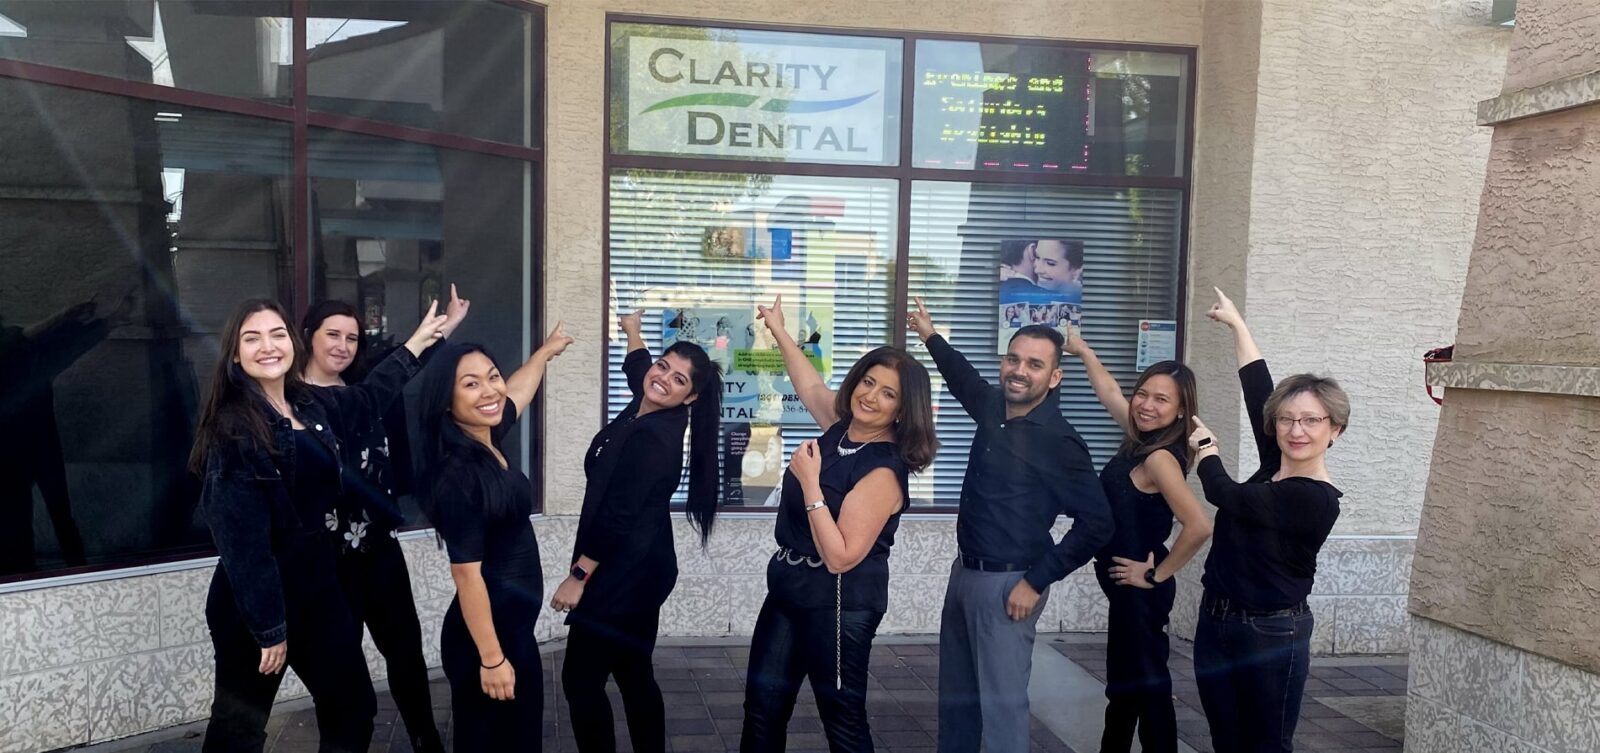 Welcome to Clarity Dental